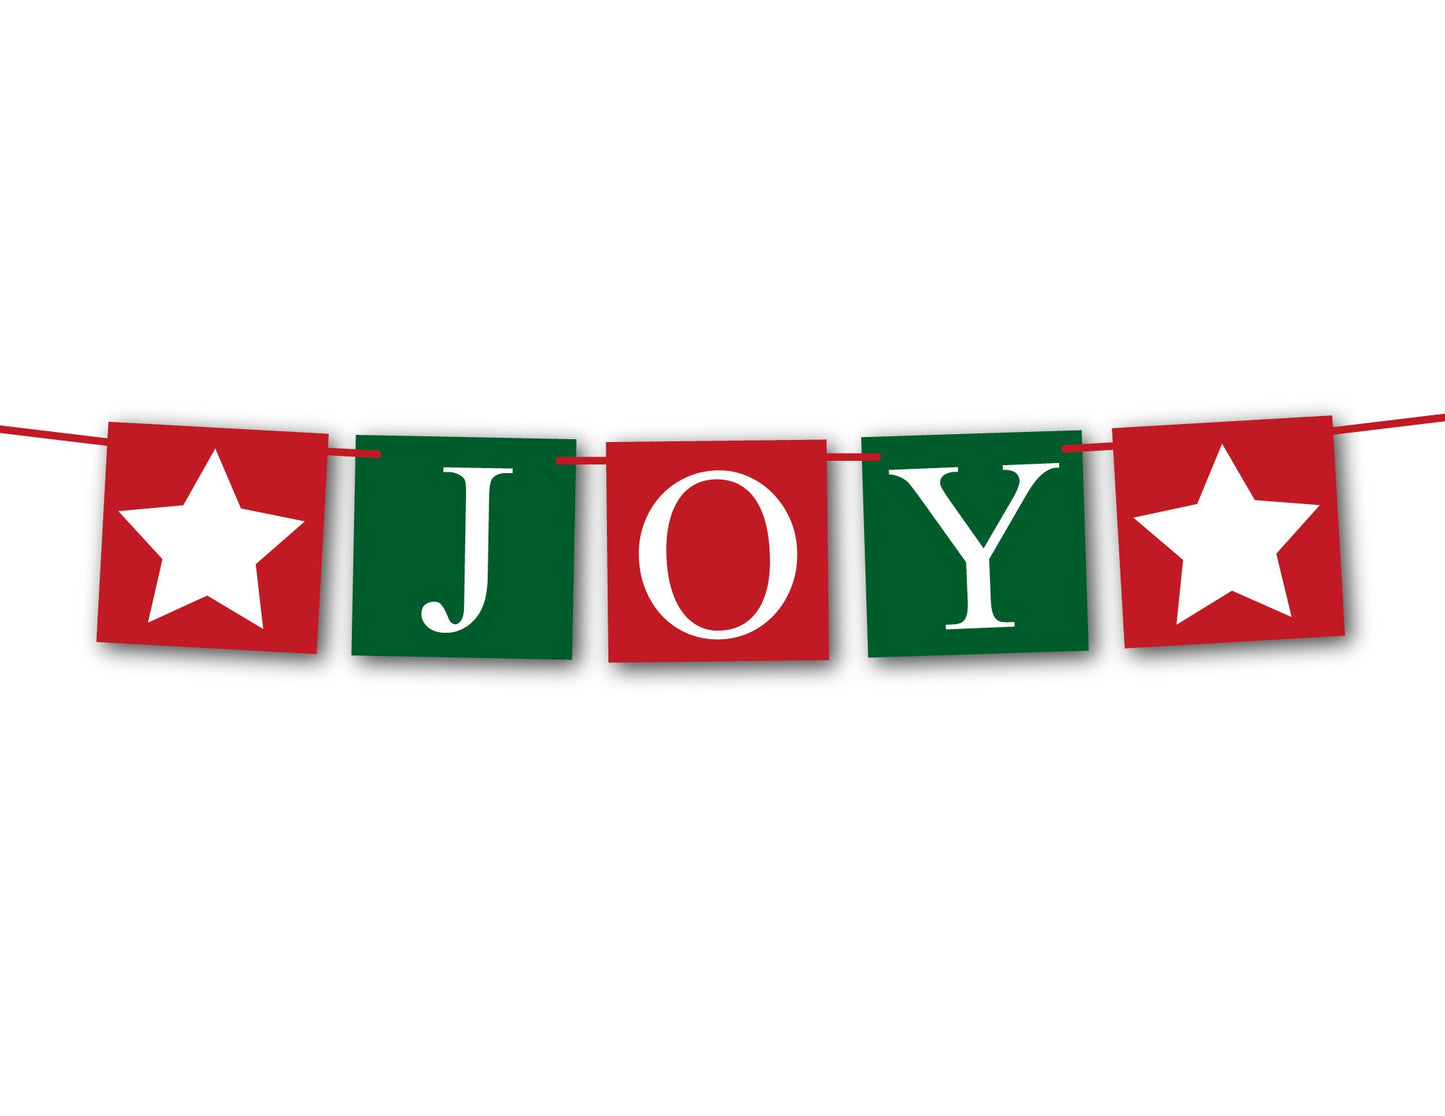 PRINTABLE festive joy banner with stars, instant download christmas banner for living room mantel, joy to the world holiday fireplace decor